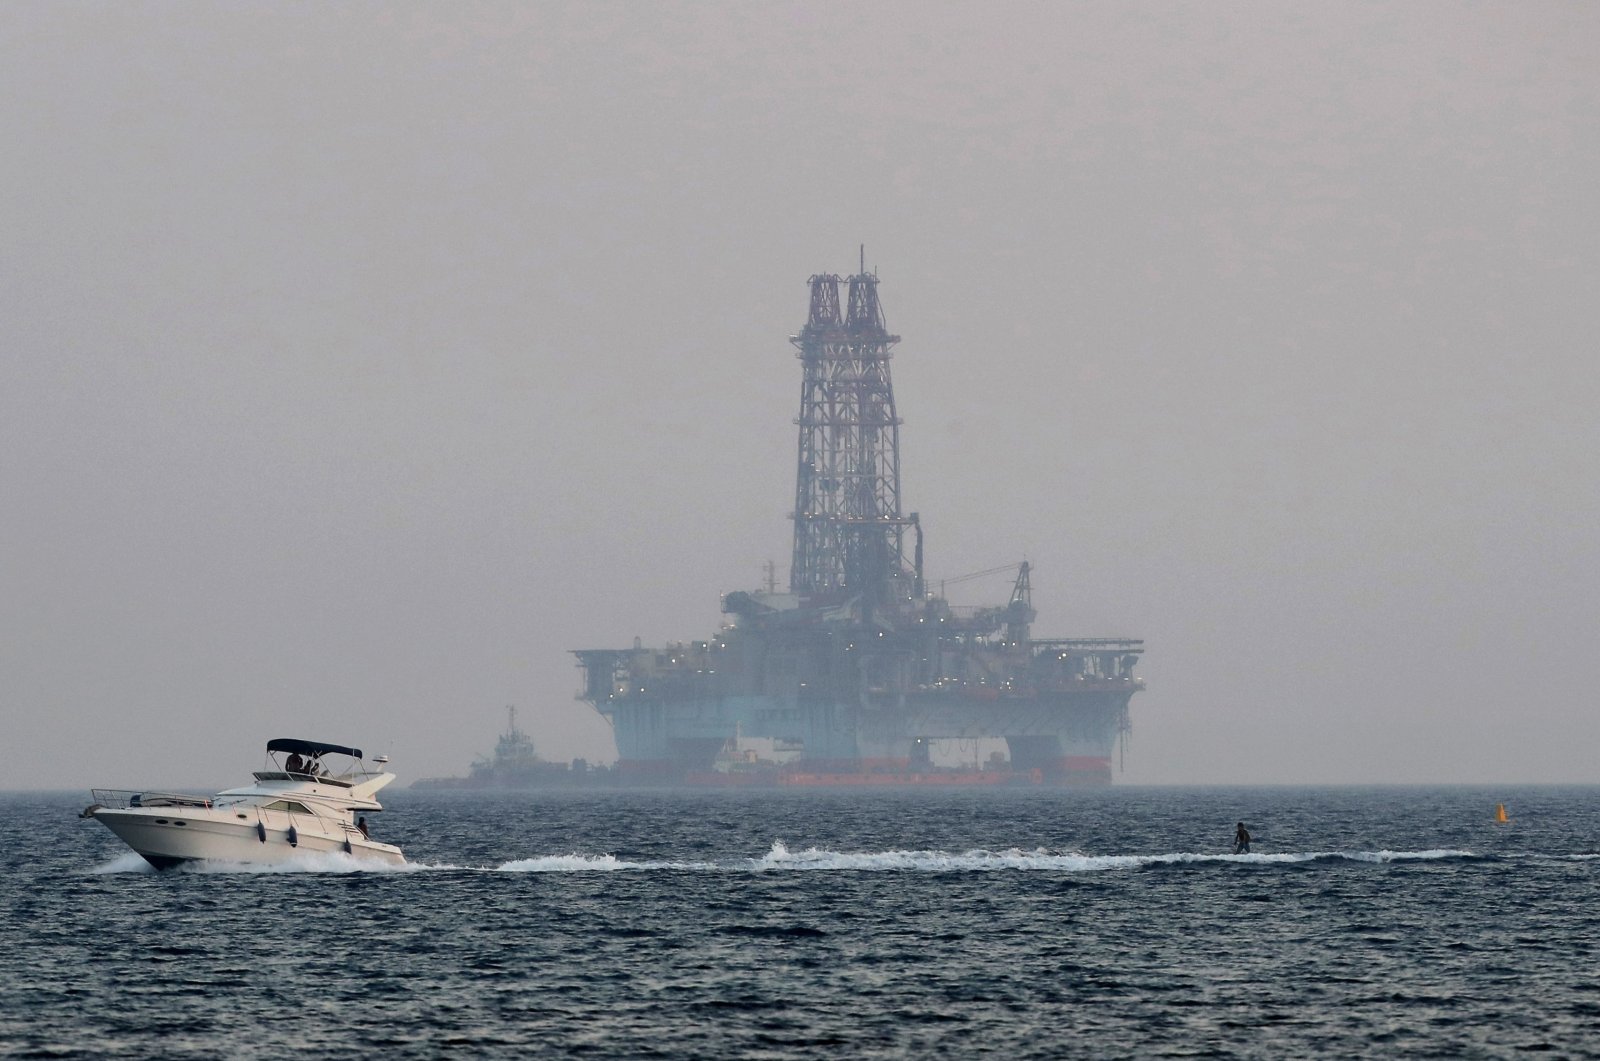 An offshore drilling rig is seen in the waters off Cyprus' coastal city of Limassol as a boat passes with a skier, July 5, 2020. (AP File Photo)